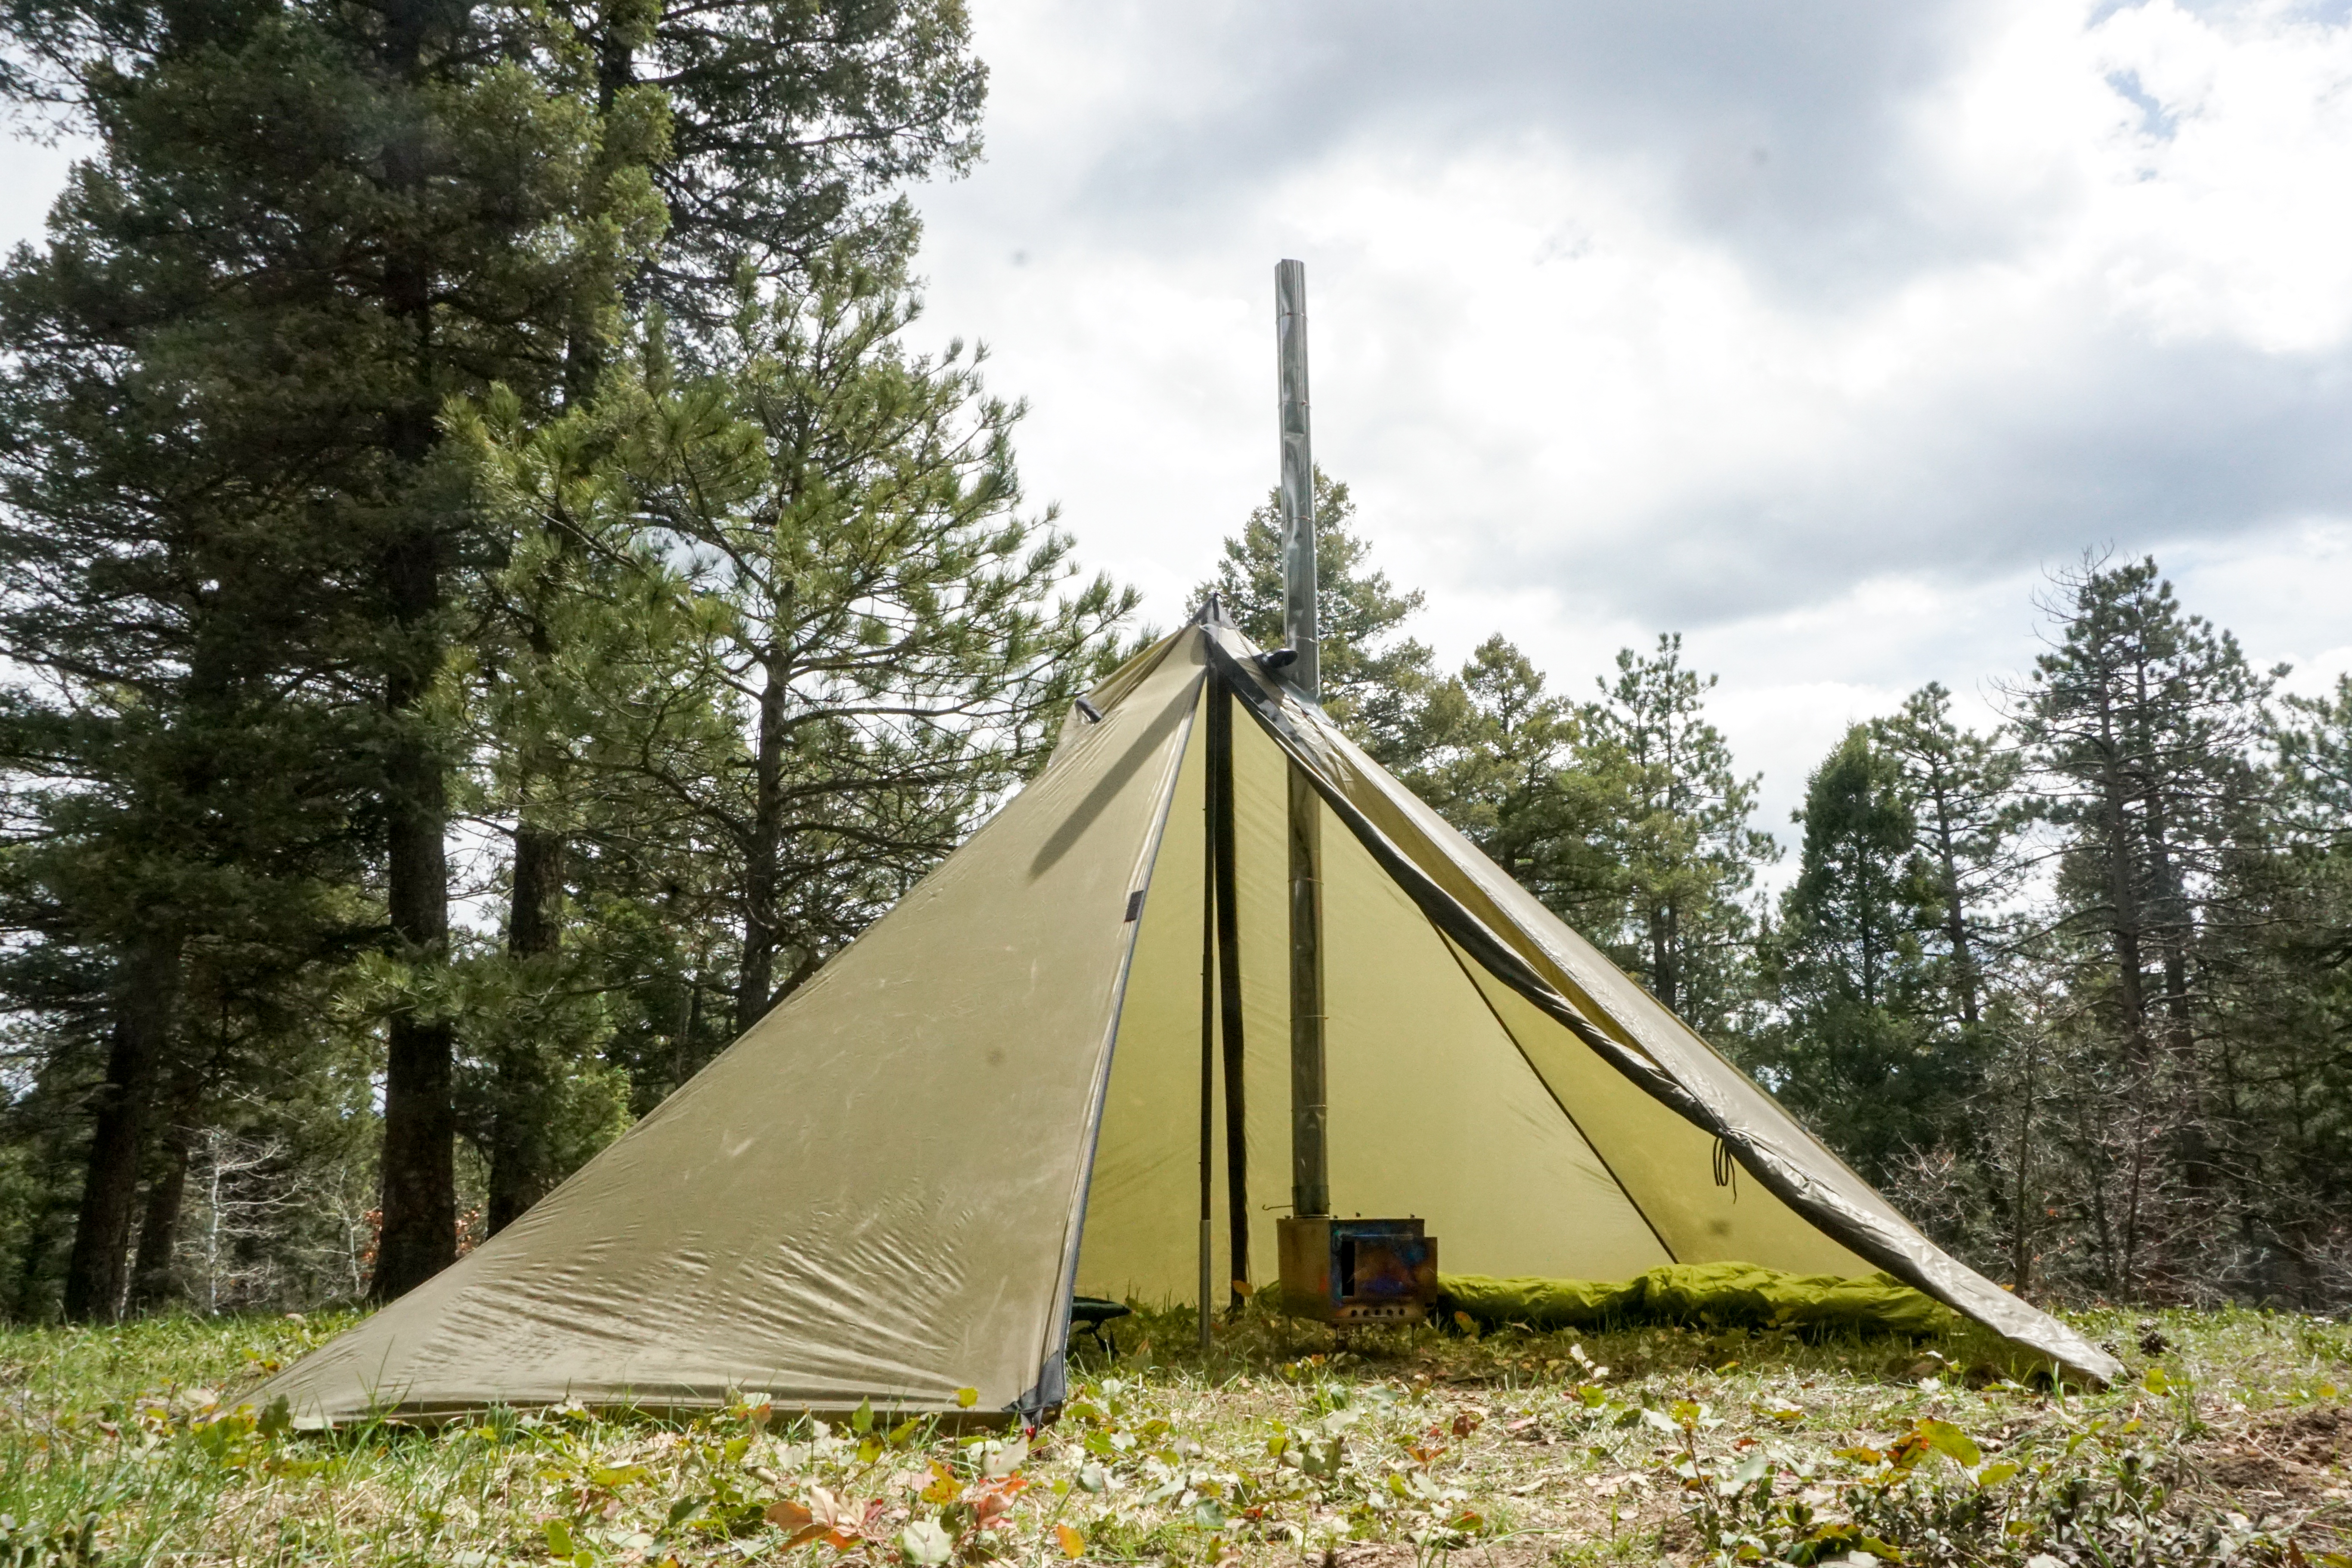 Featured Product: Cimarron Tent - Seek Outside